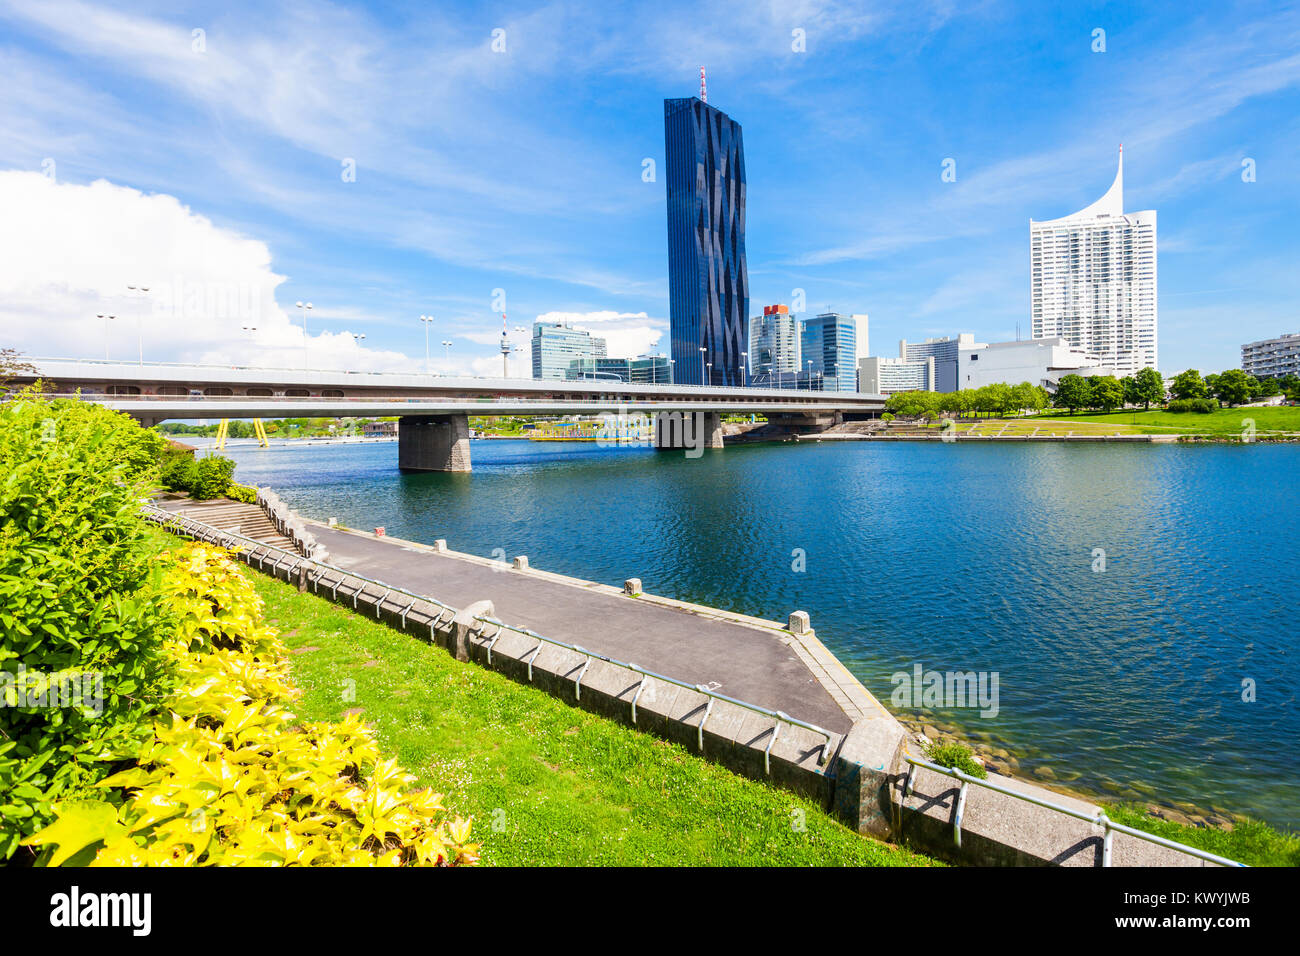 Danube City Or Donaustadt Is The District Of Vienna Austria Donaustadt Danube City Is A Modern Quarter With Skyscrapers And Business Centres In Vie Stock Photo Alamy